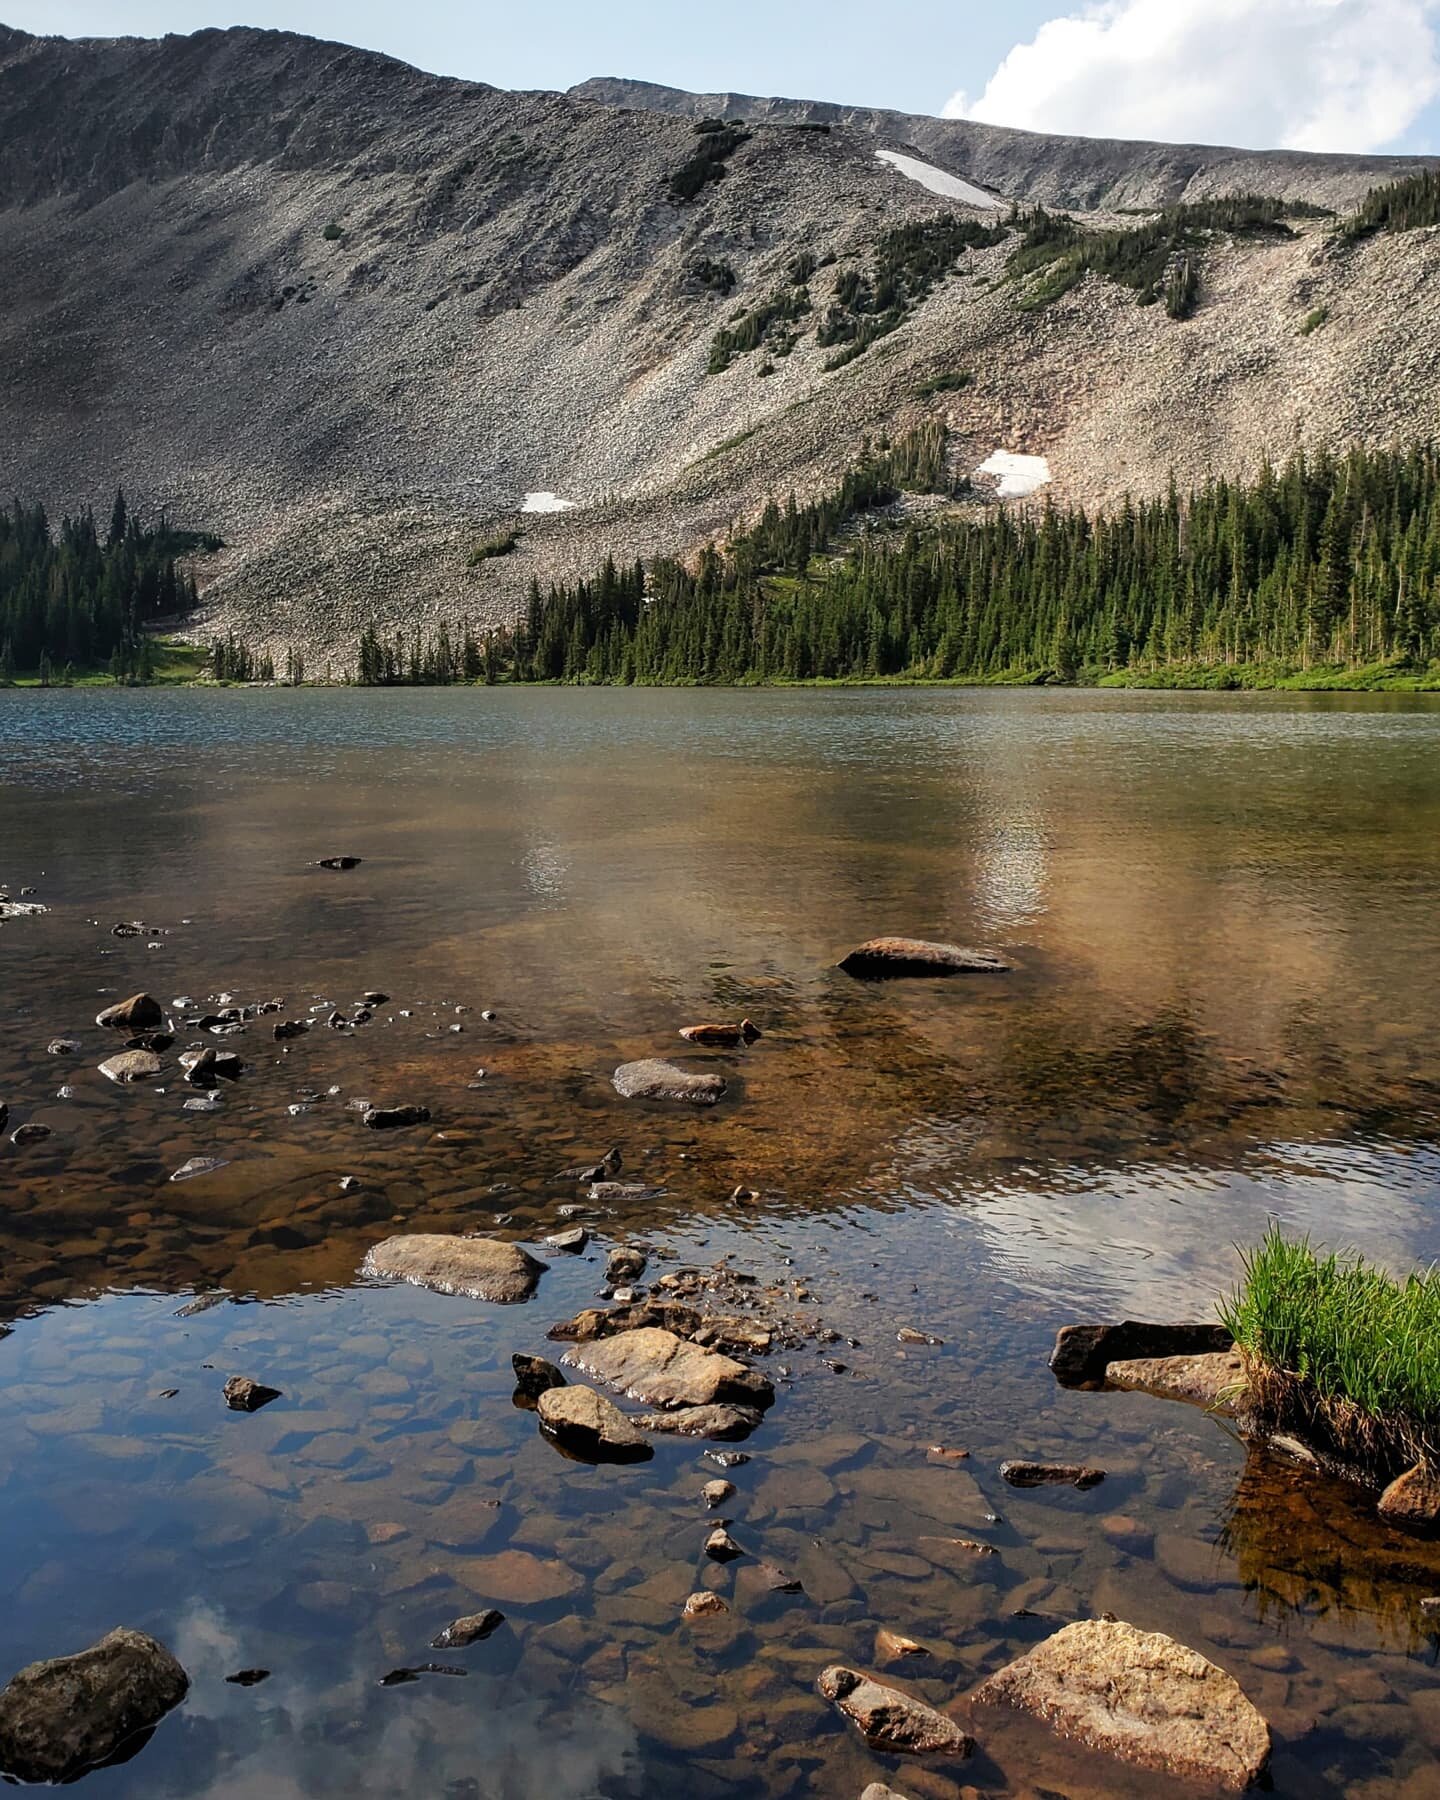 Lakeside in the Indian Peaks Wilderness. Clear skies, no storms, and just a slight breeze allowed us to enjoy Blue + Mitchell for much longer than previous years when we'd been eaten alive by mosquitos or chased off Blue by incoming storms.